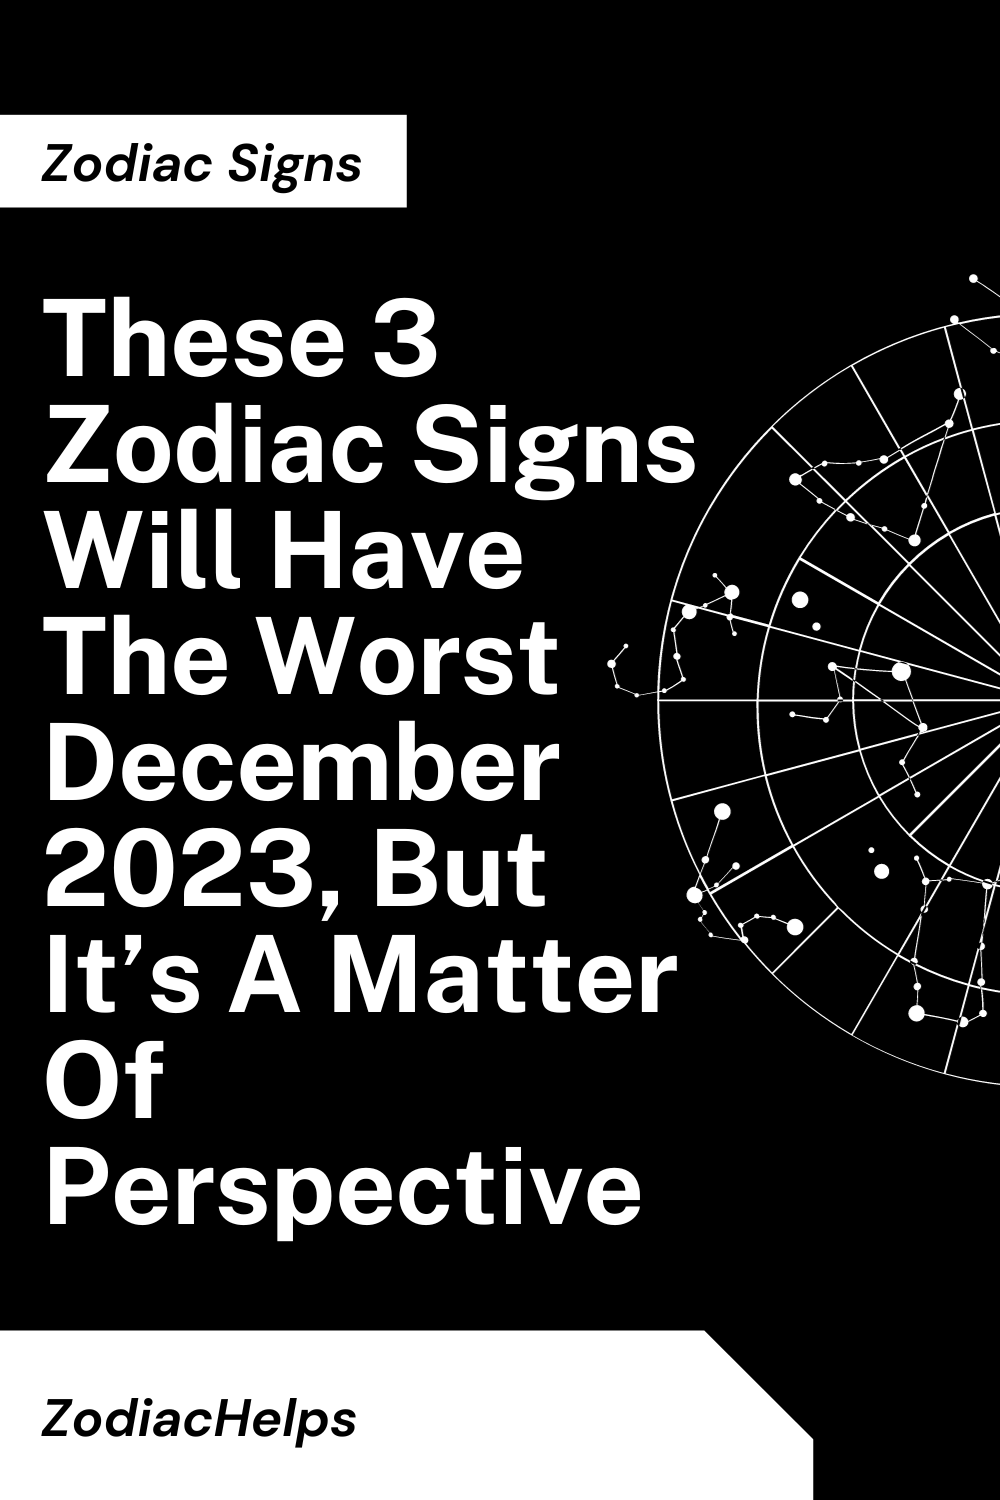 These 3 Zodiac Signs Will Have The Worst December 2023, But It’s A Matter Of Perspective